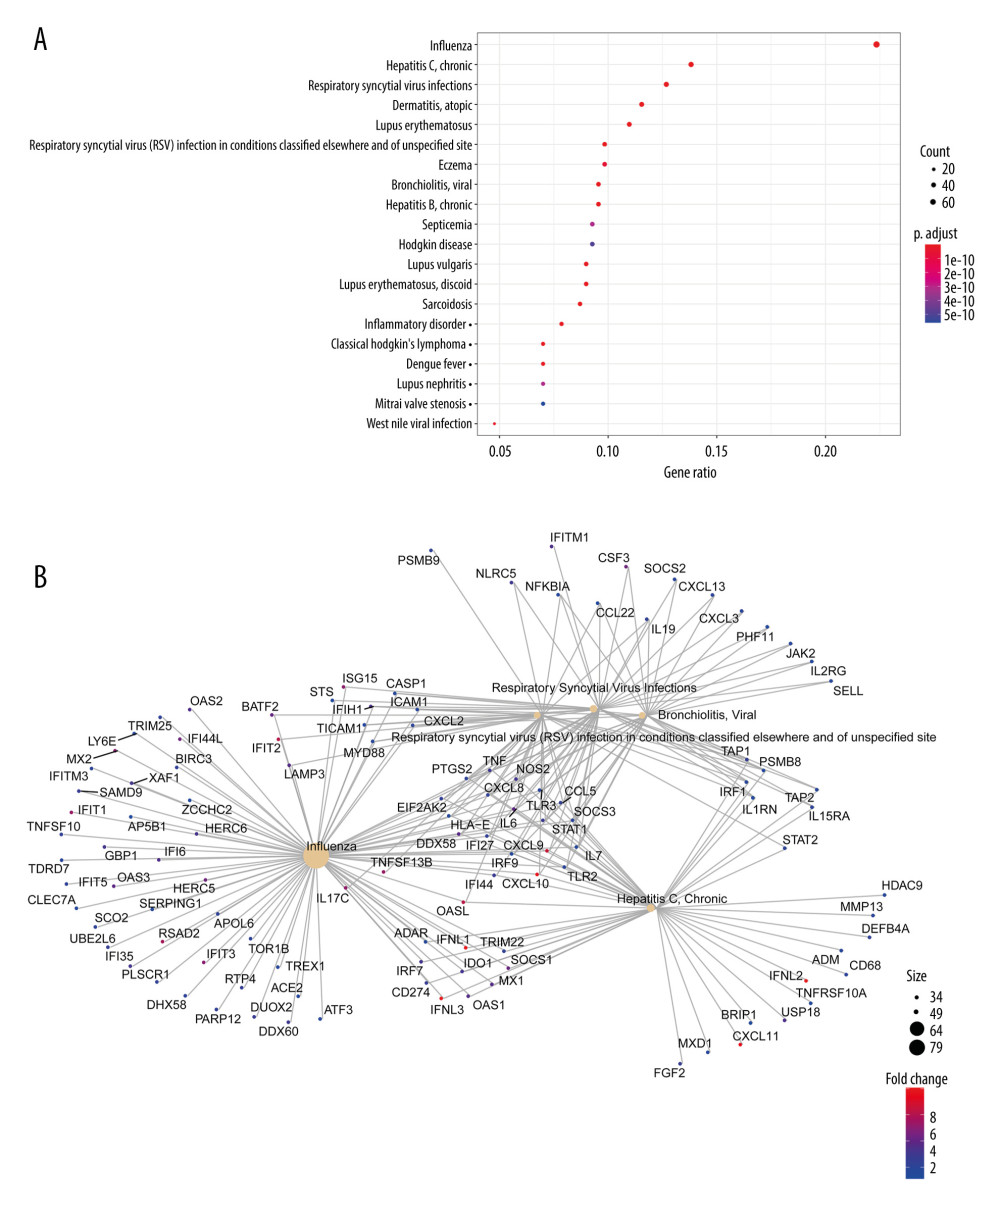 Disease enrichment analysis of DEGs in the intersection of RVA and RVC. (A) Disease enrichment analysis; (B) The interaction network between diseases and DEGs.